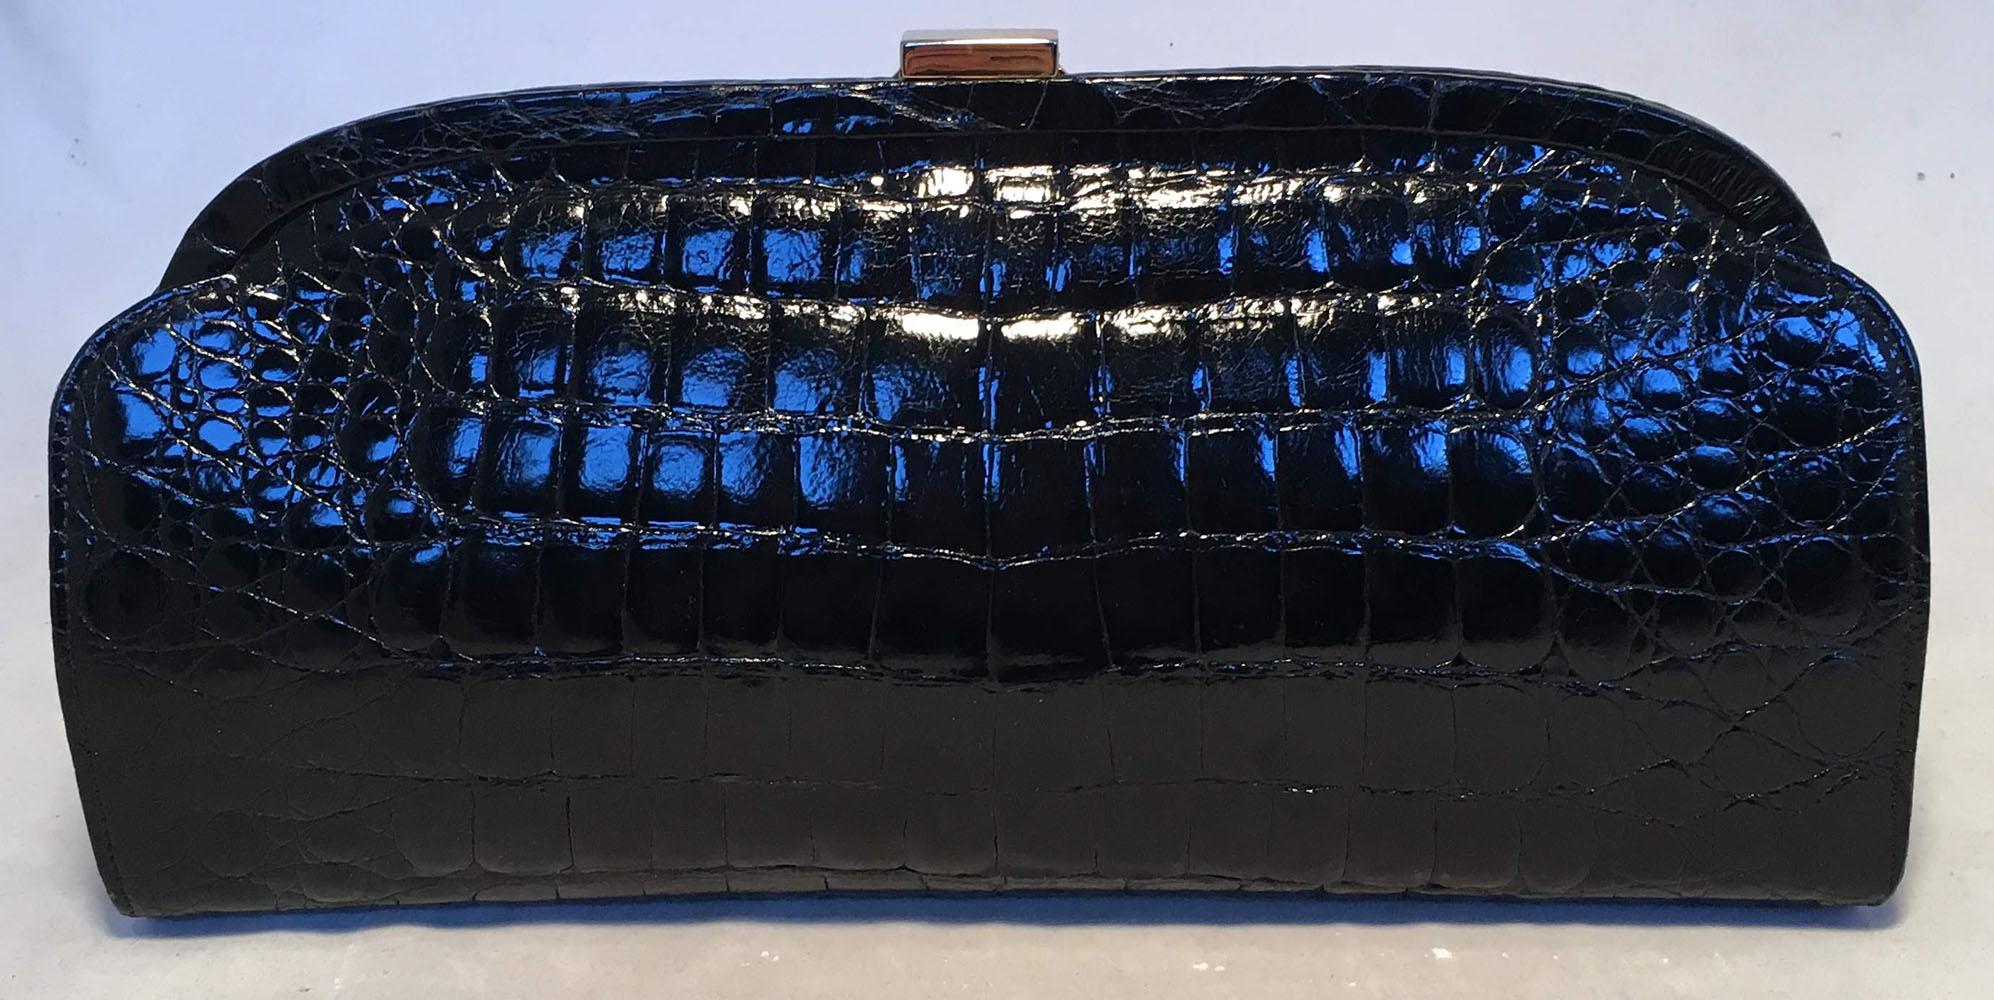 CLASSIC Vintage Vero Black Crocodile Italian Clutch in excellent condition.  Black crocodile leather trimmed with gold hardware. Lifting top closure opens to a black leather interior that holds one slit and one zippered side pockets and an attached